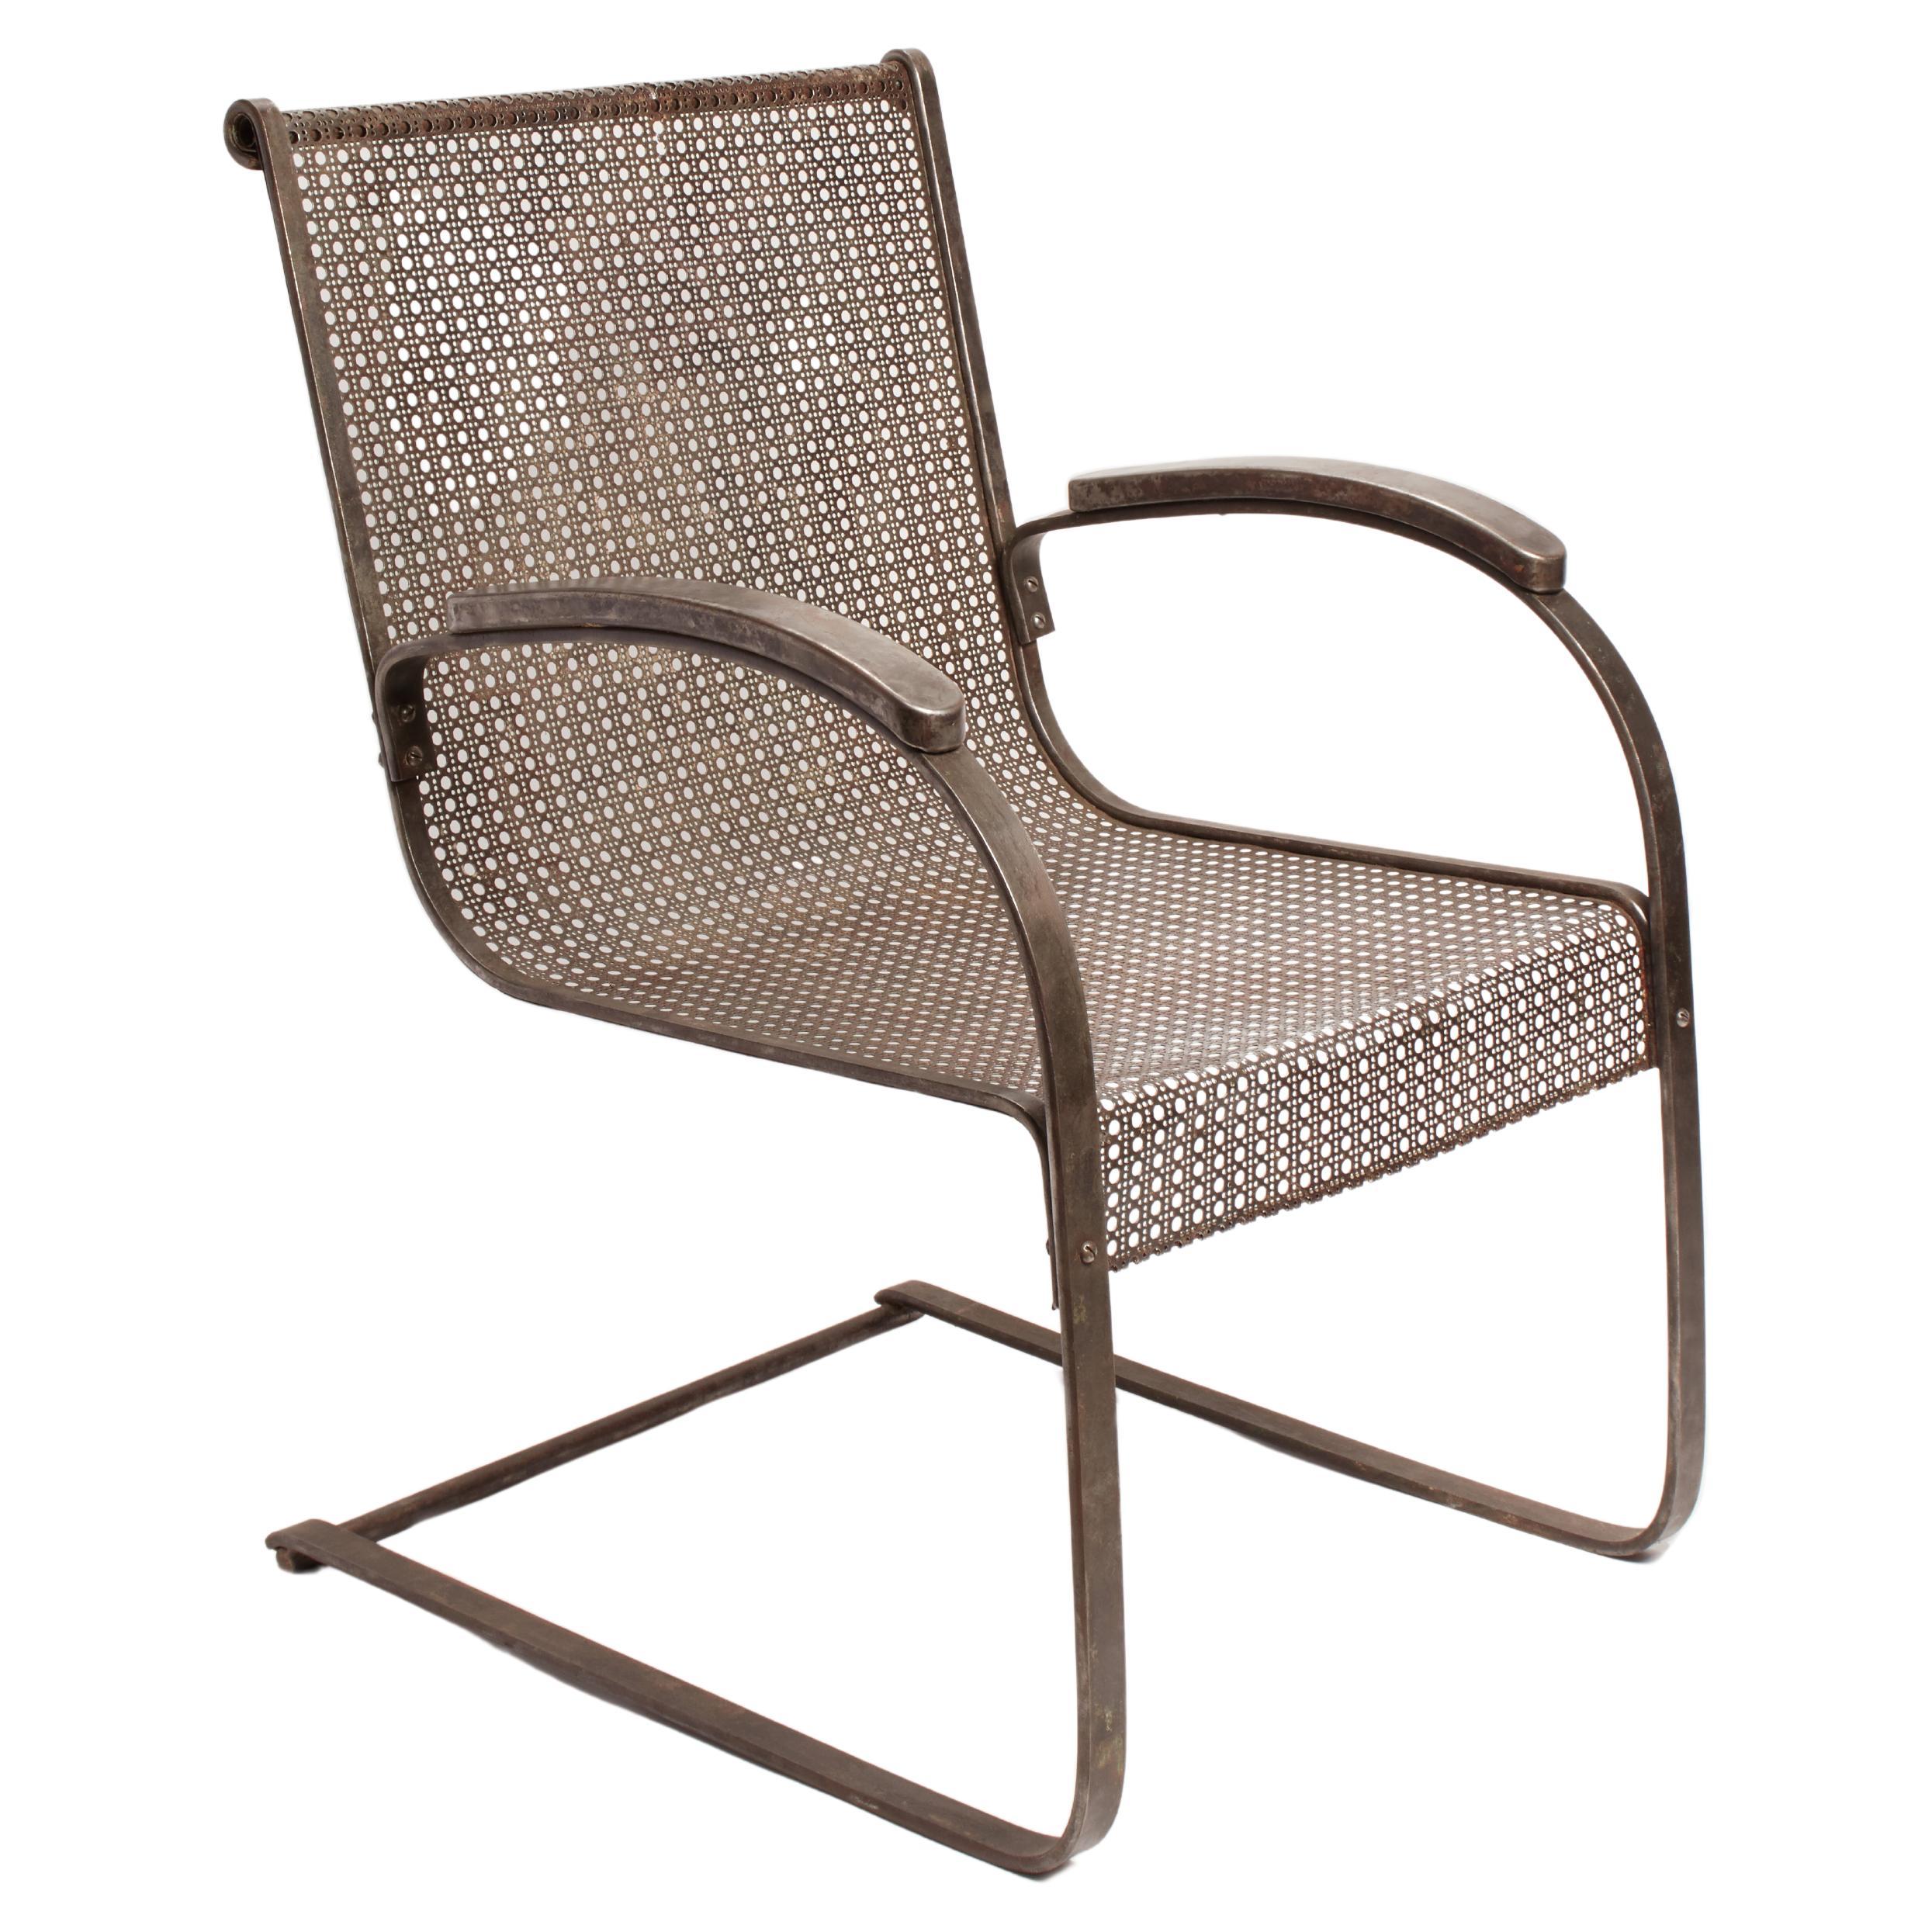 Pair of Metal Armchair, USA 1930 For Sale